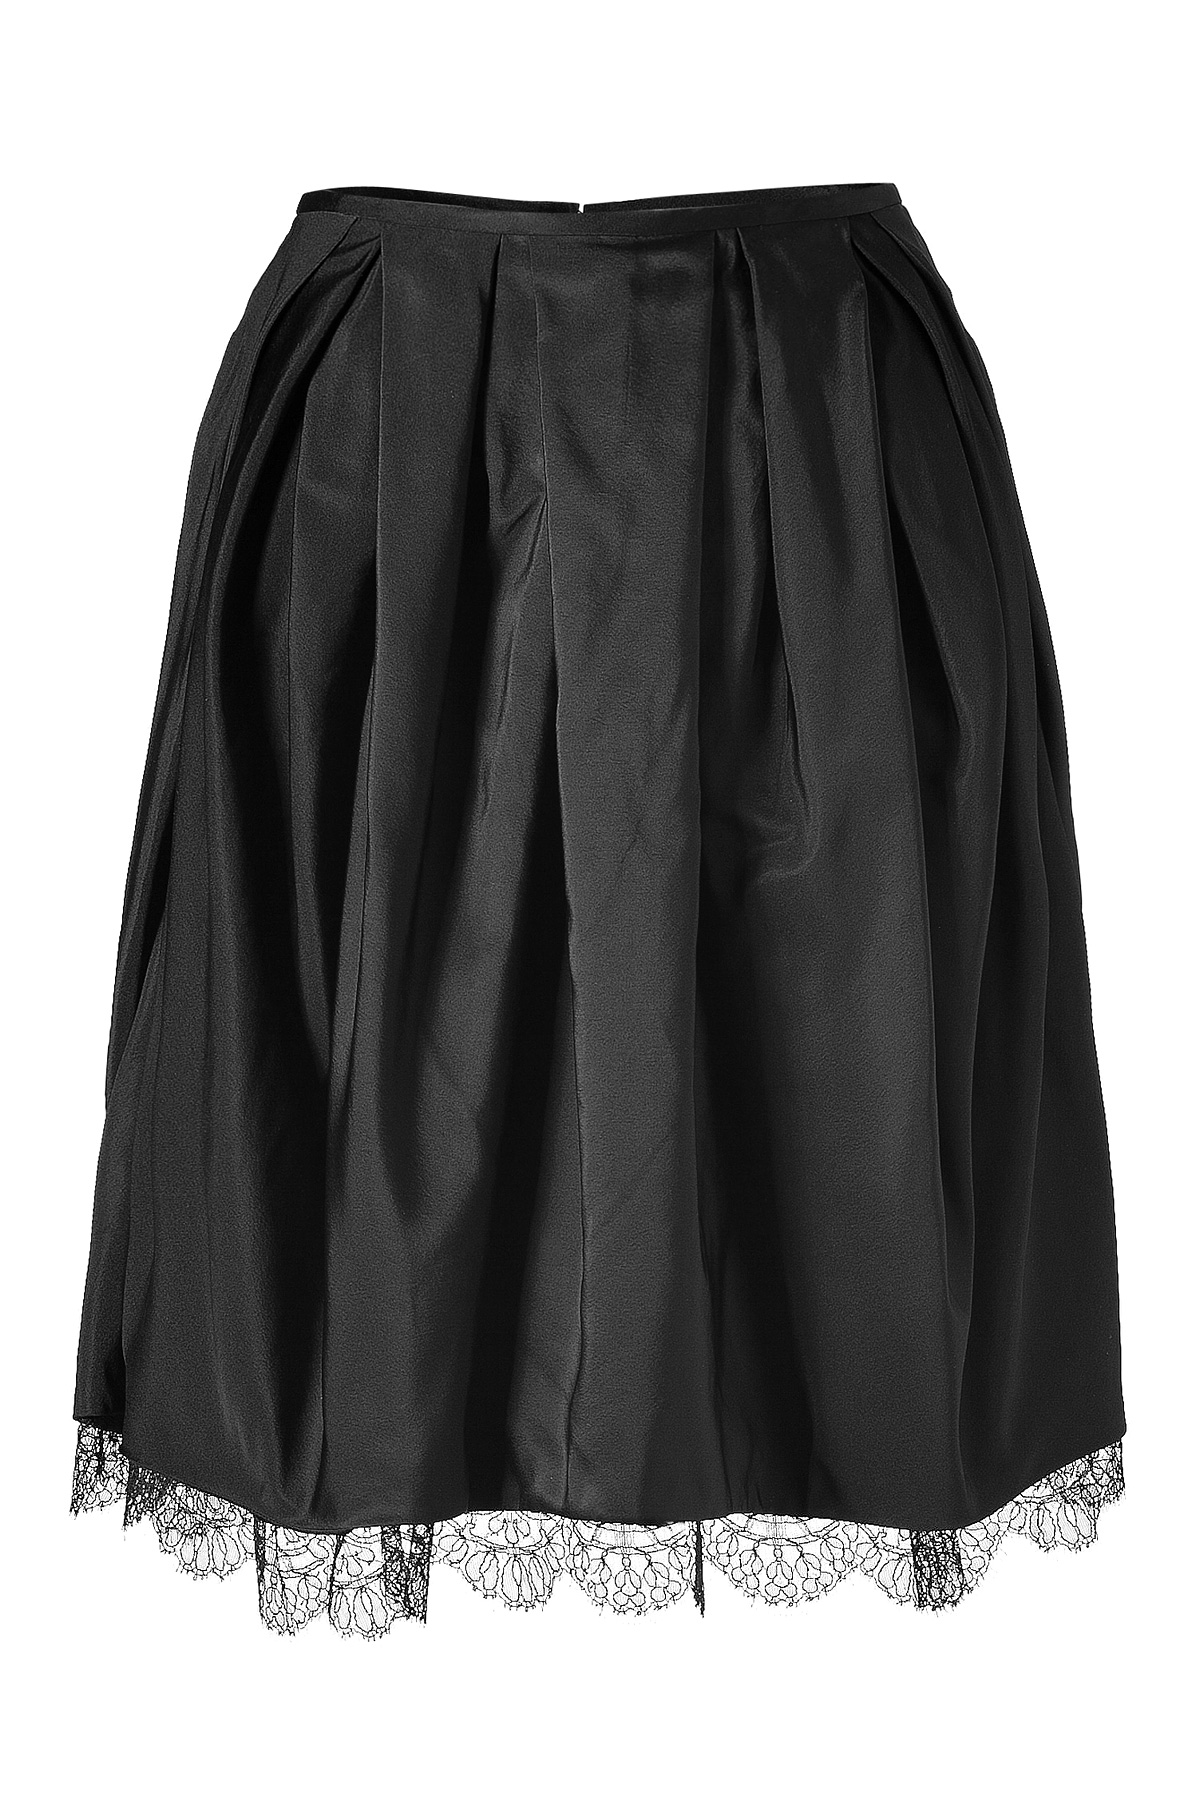 Jason wu Black Sculpted Silk Skirt with Lace Trim in Black | Lyst